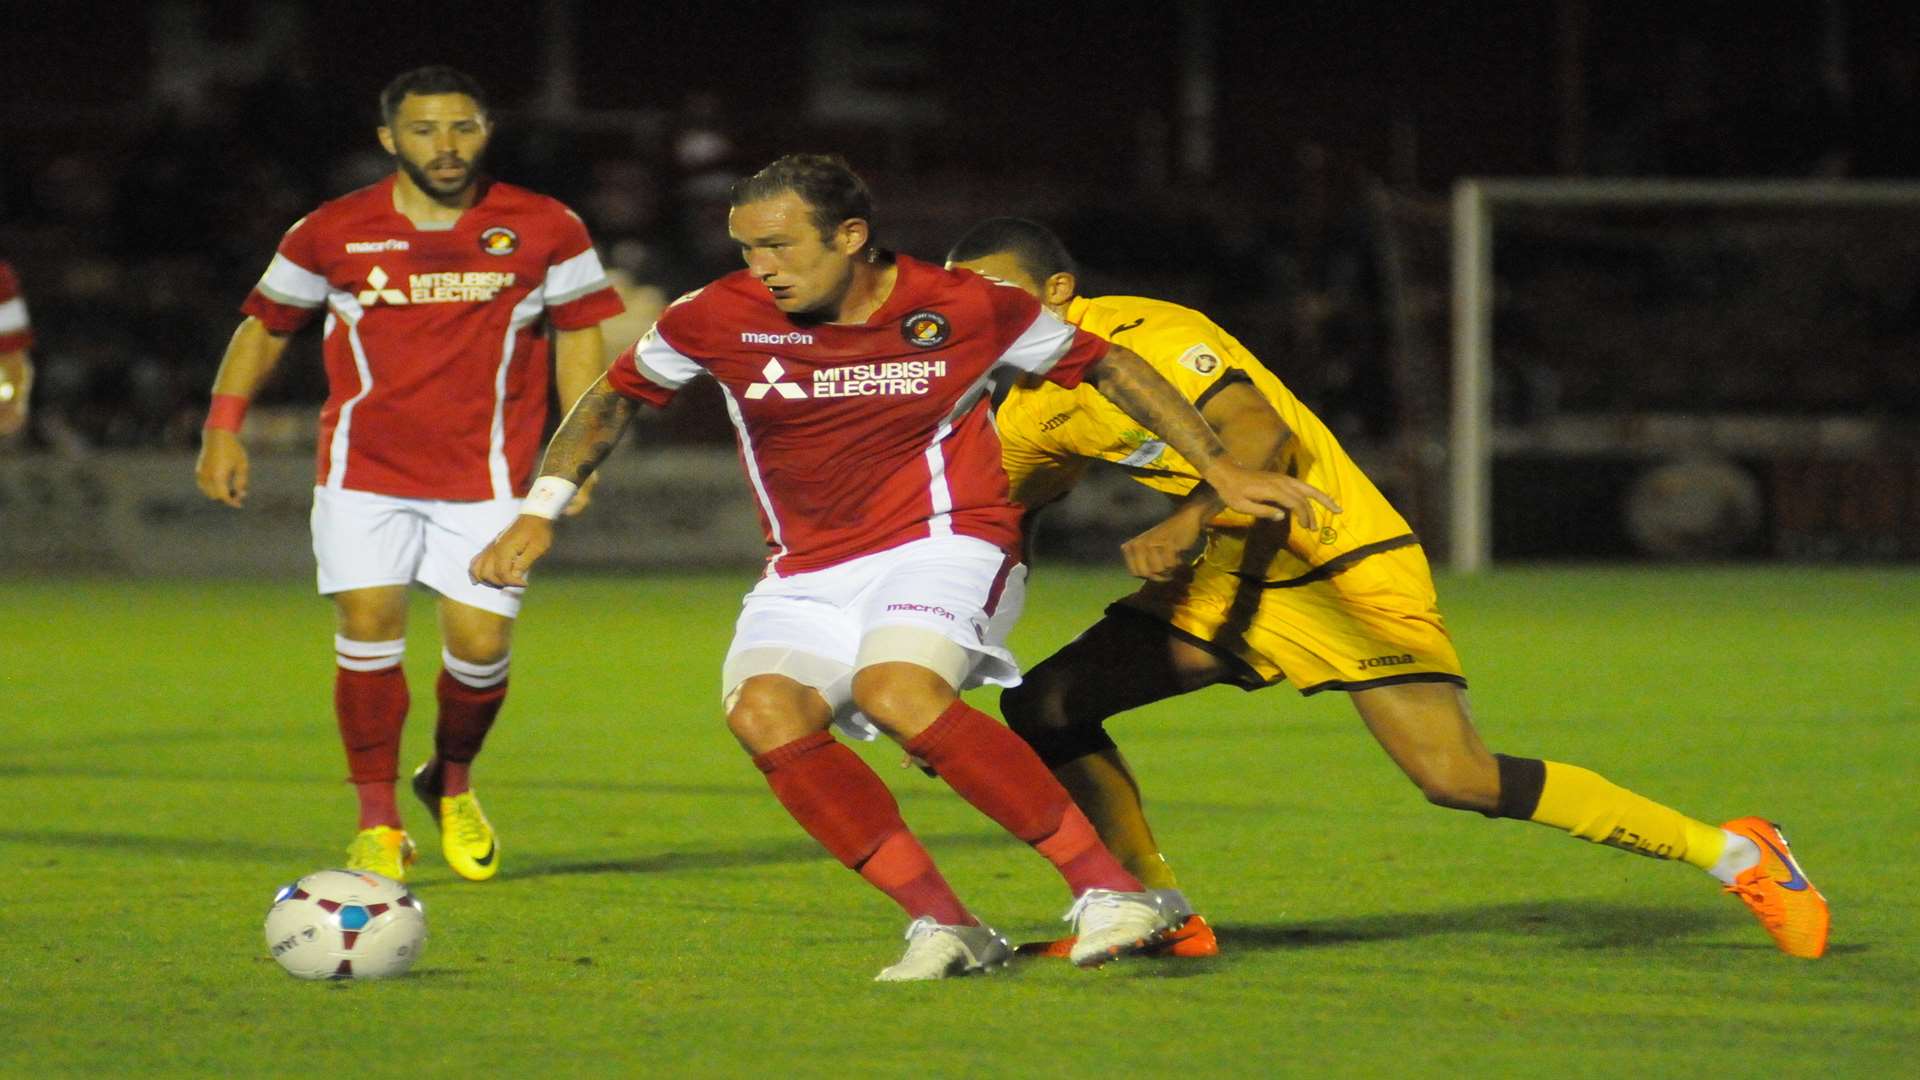 Danny Kedwell holds off his man as Robbie Willmott looks on Picture: Steve Crispe